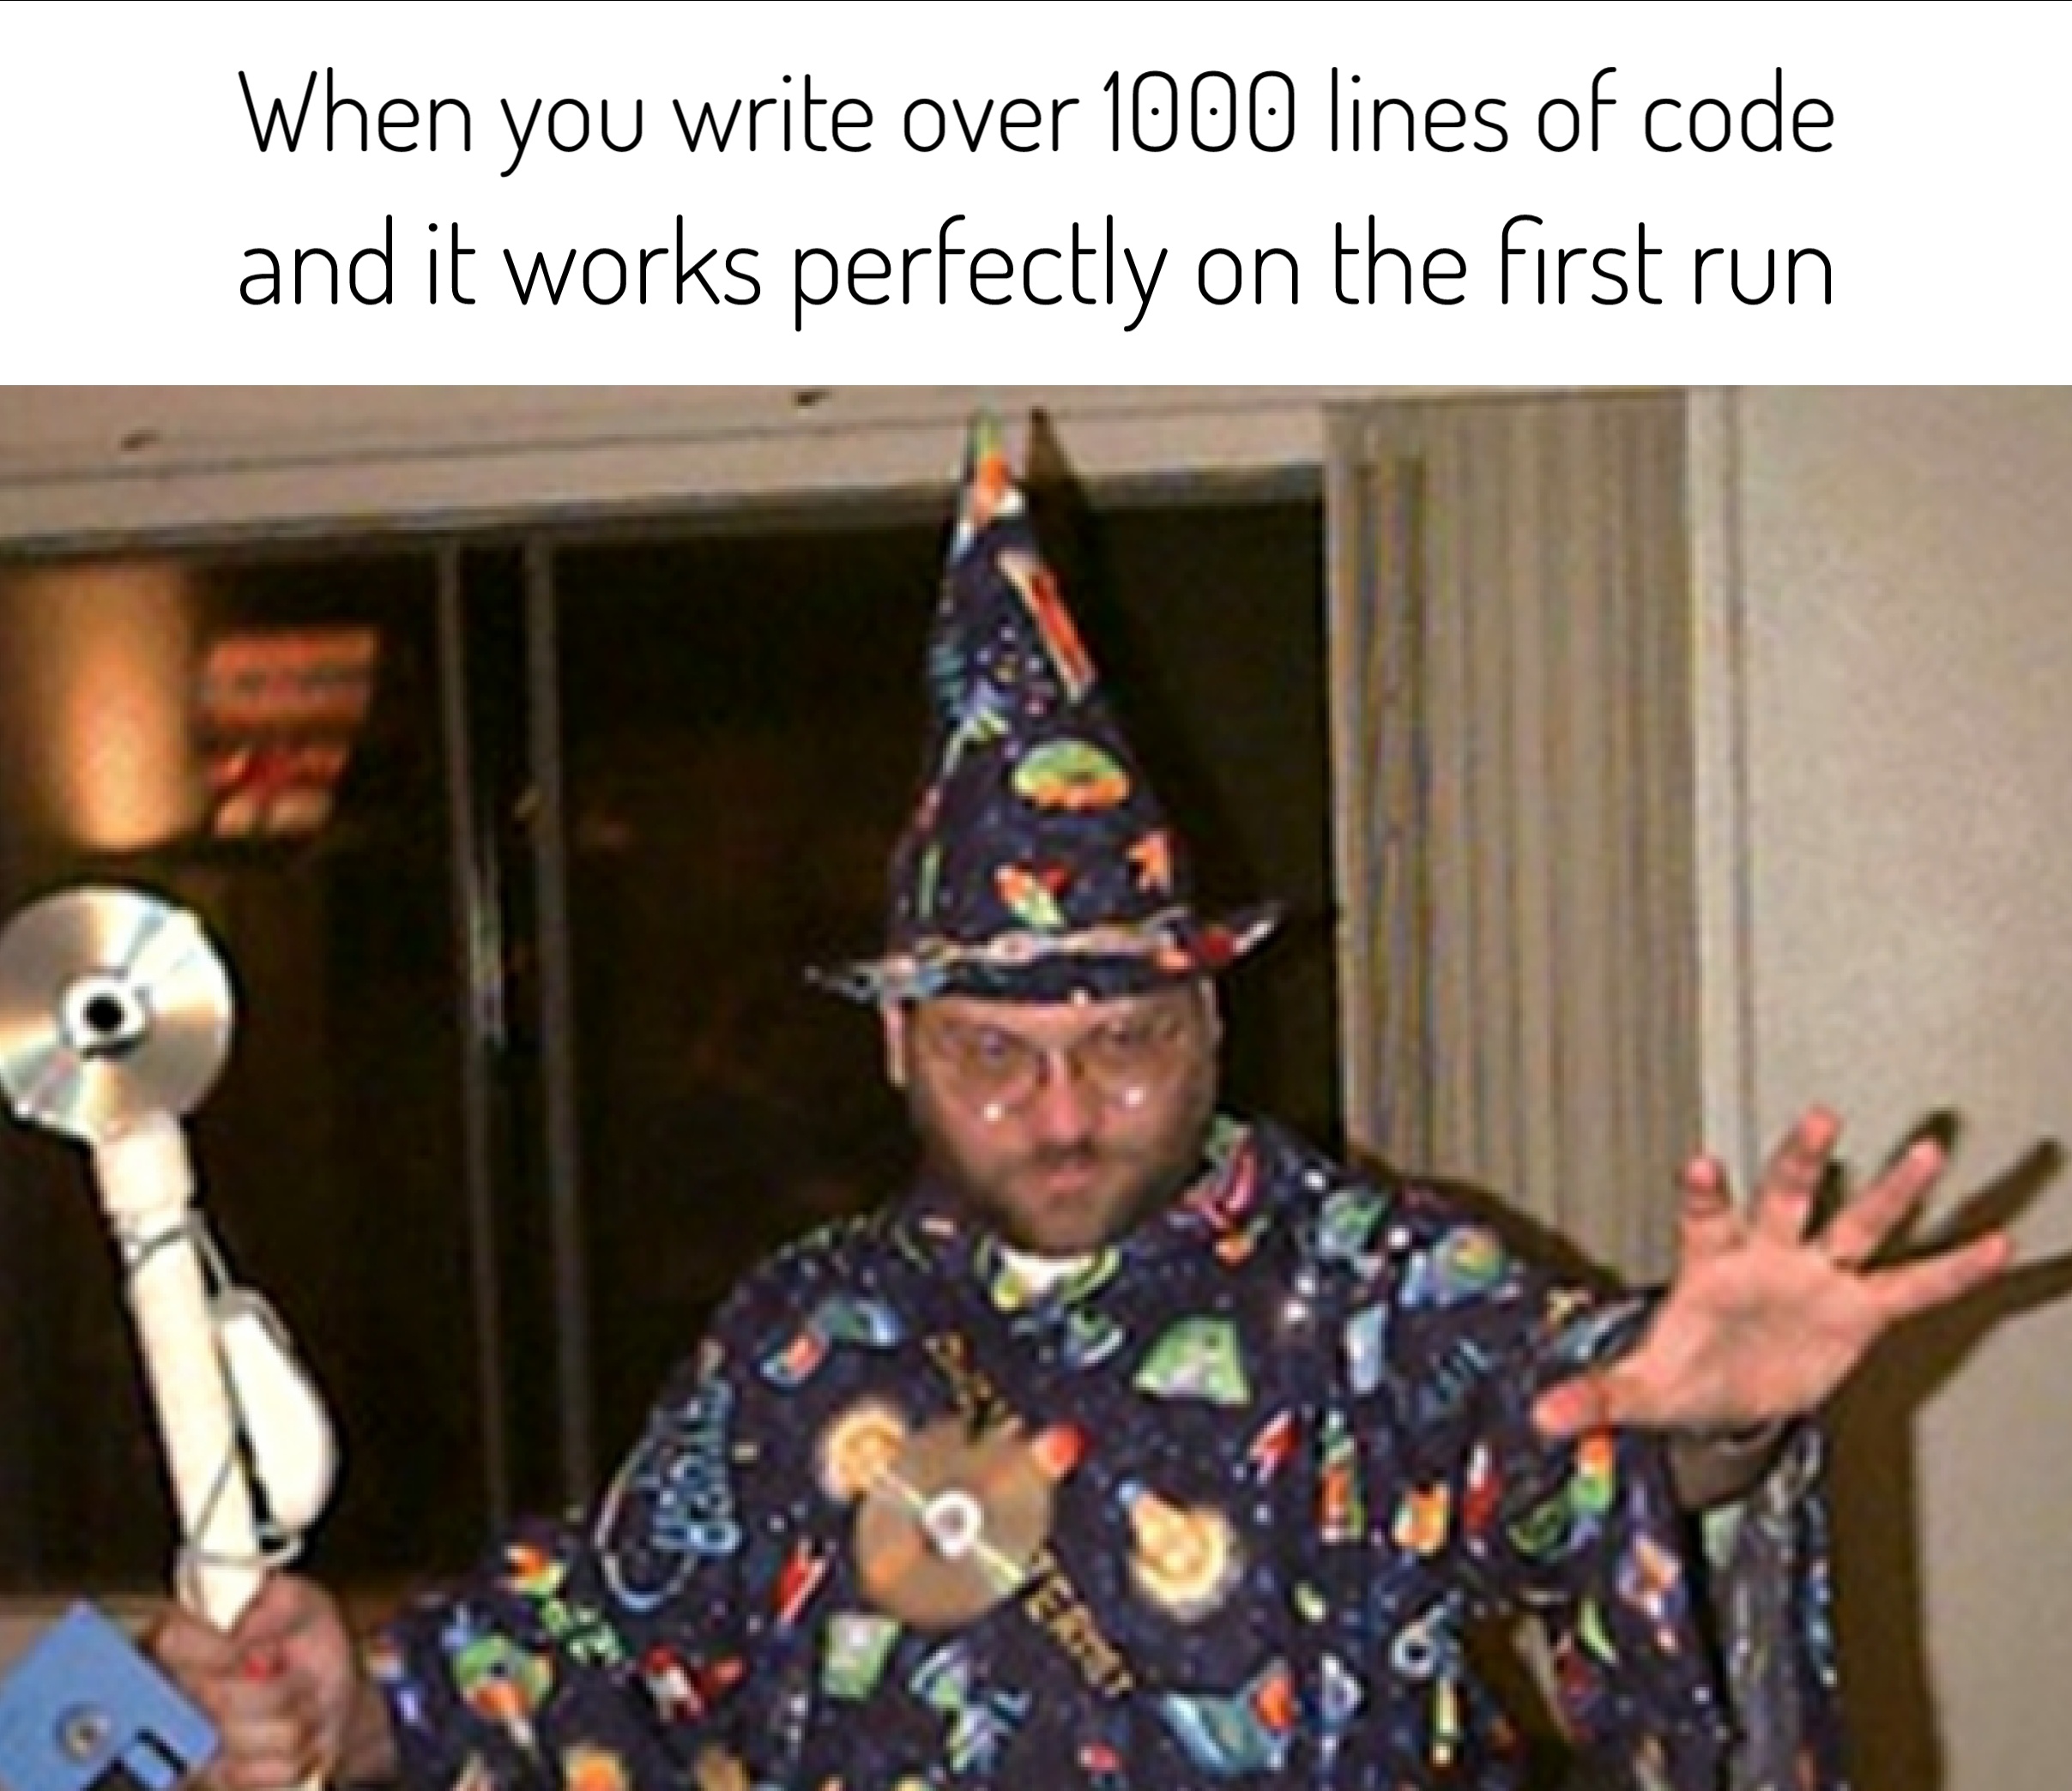 you write 1000 lines of code - When you write over 1000 lines of code and it works perfectly on the first run 10 Sa